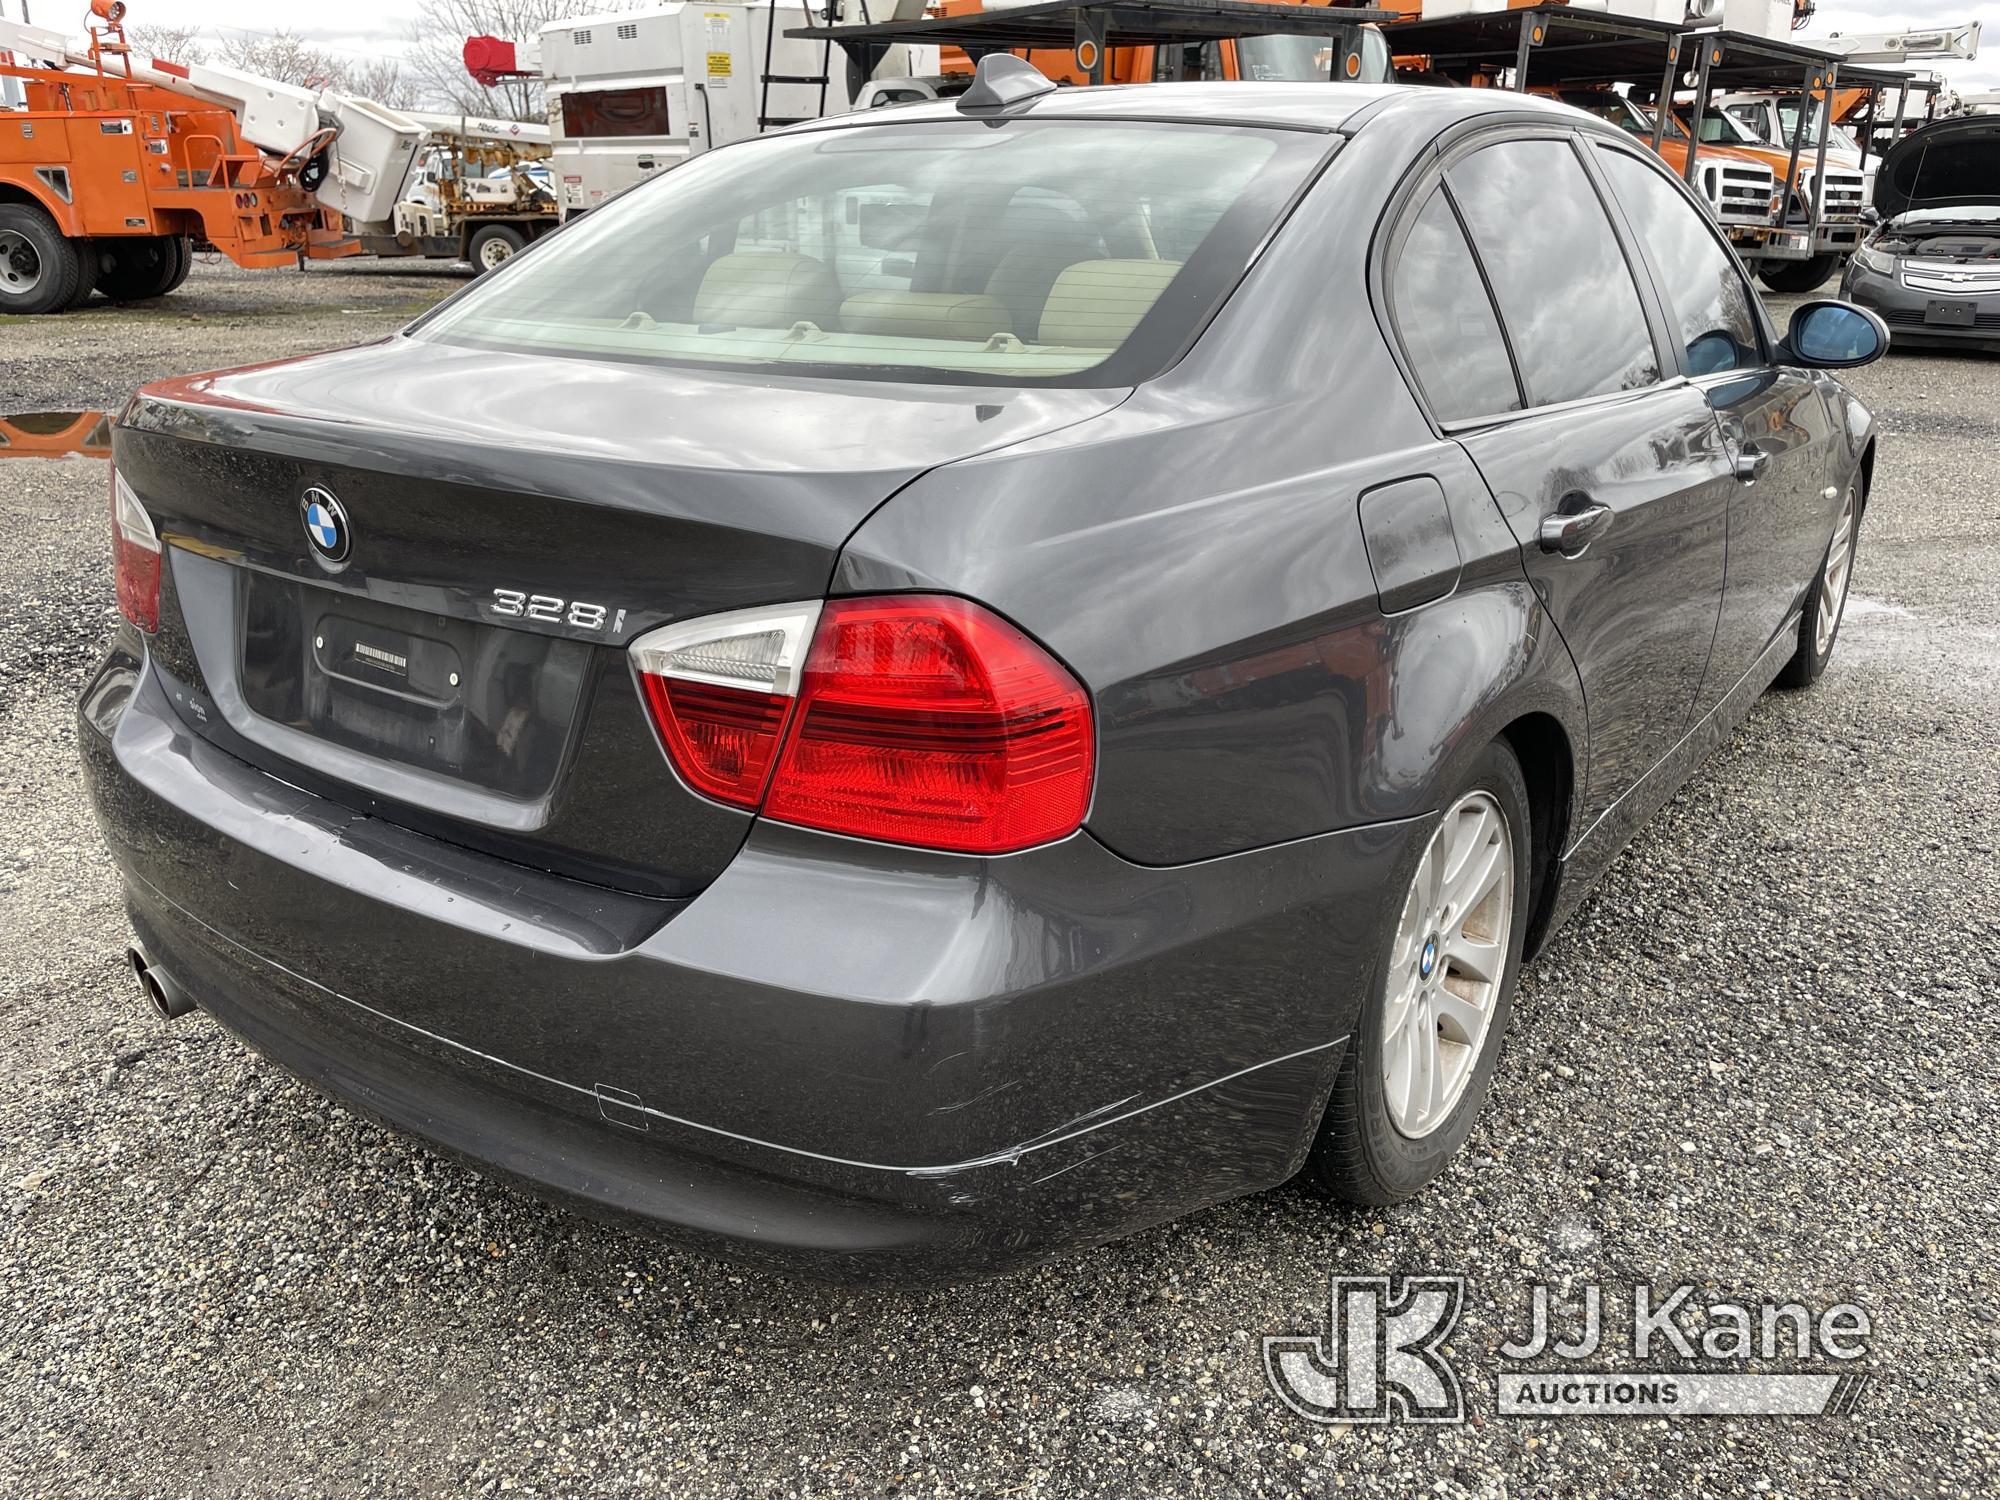 (Plymouth Meeting, PA) 2008 BMW 328i 4-Door Sedan Reconstructed title) Runs & Moves, Body & Rust Dam